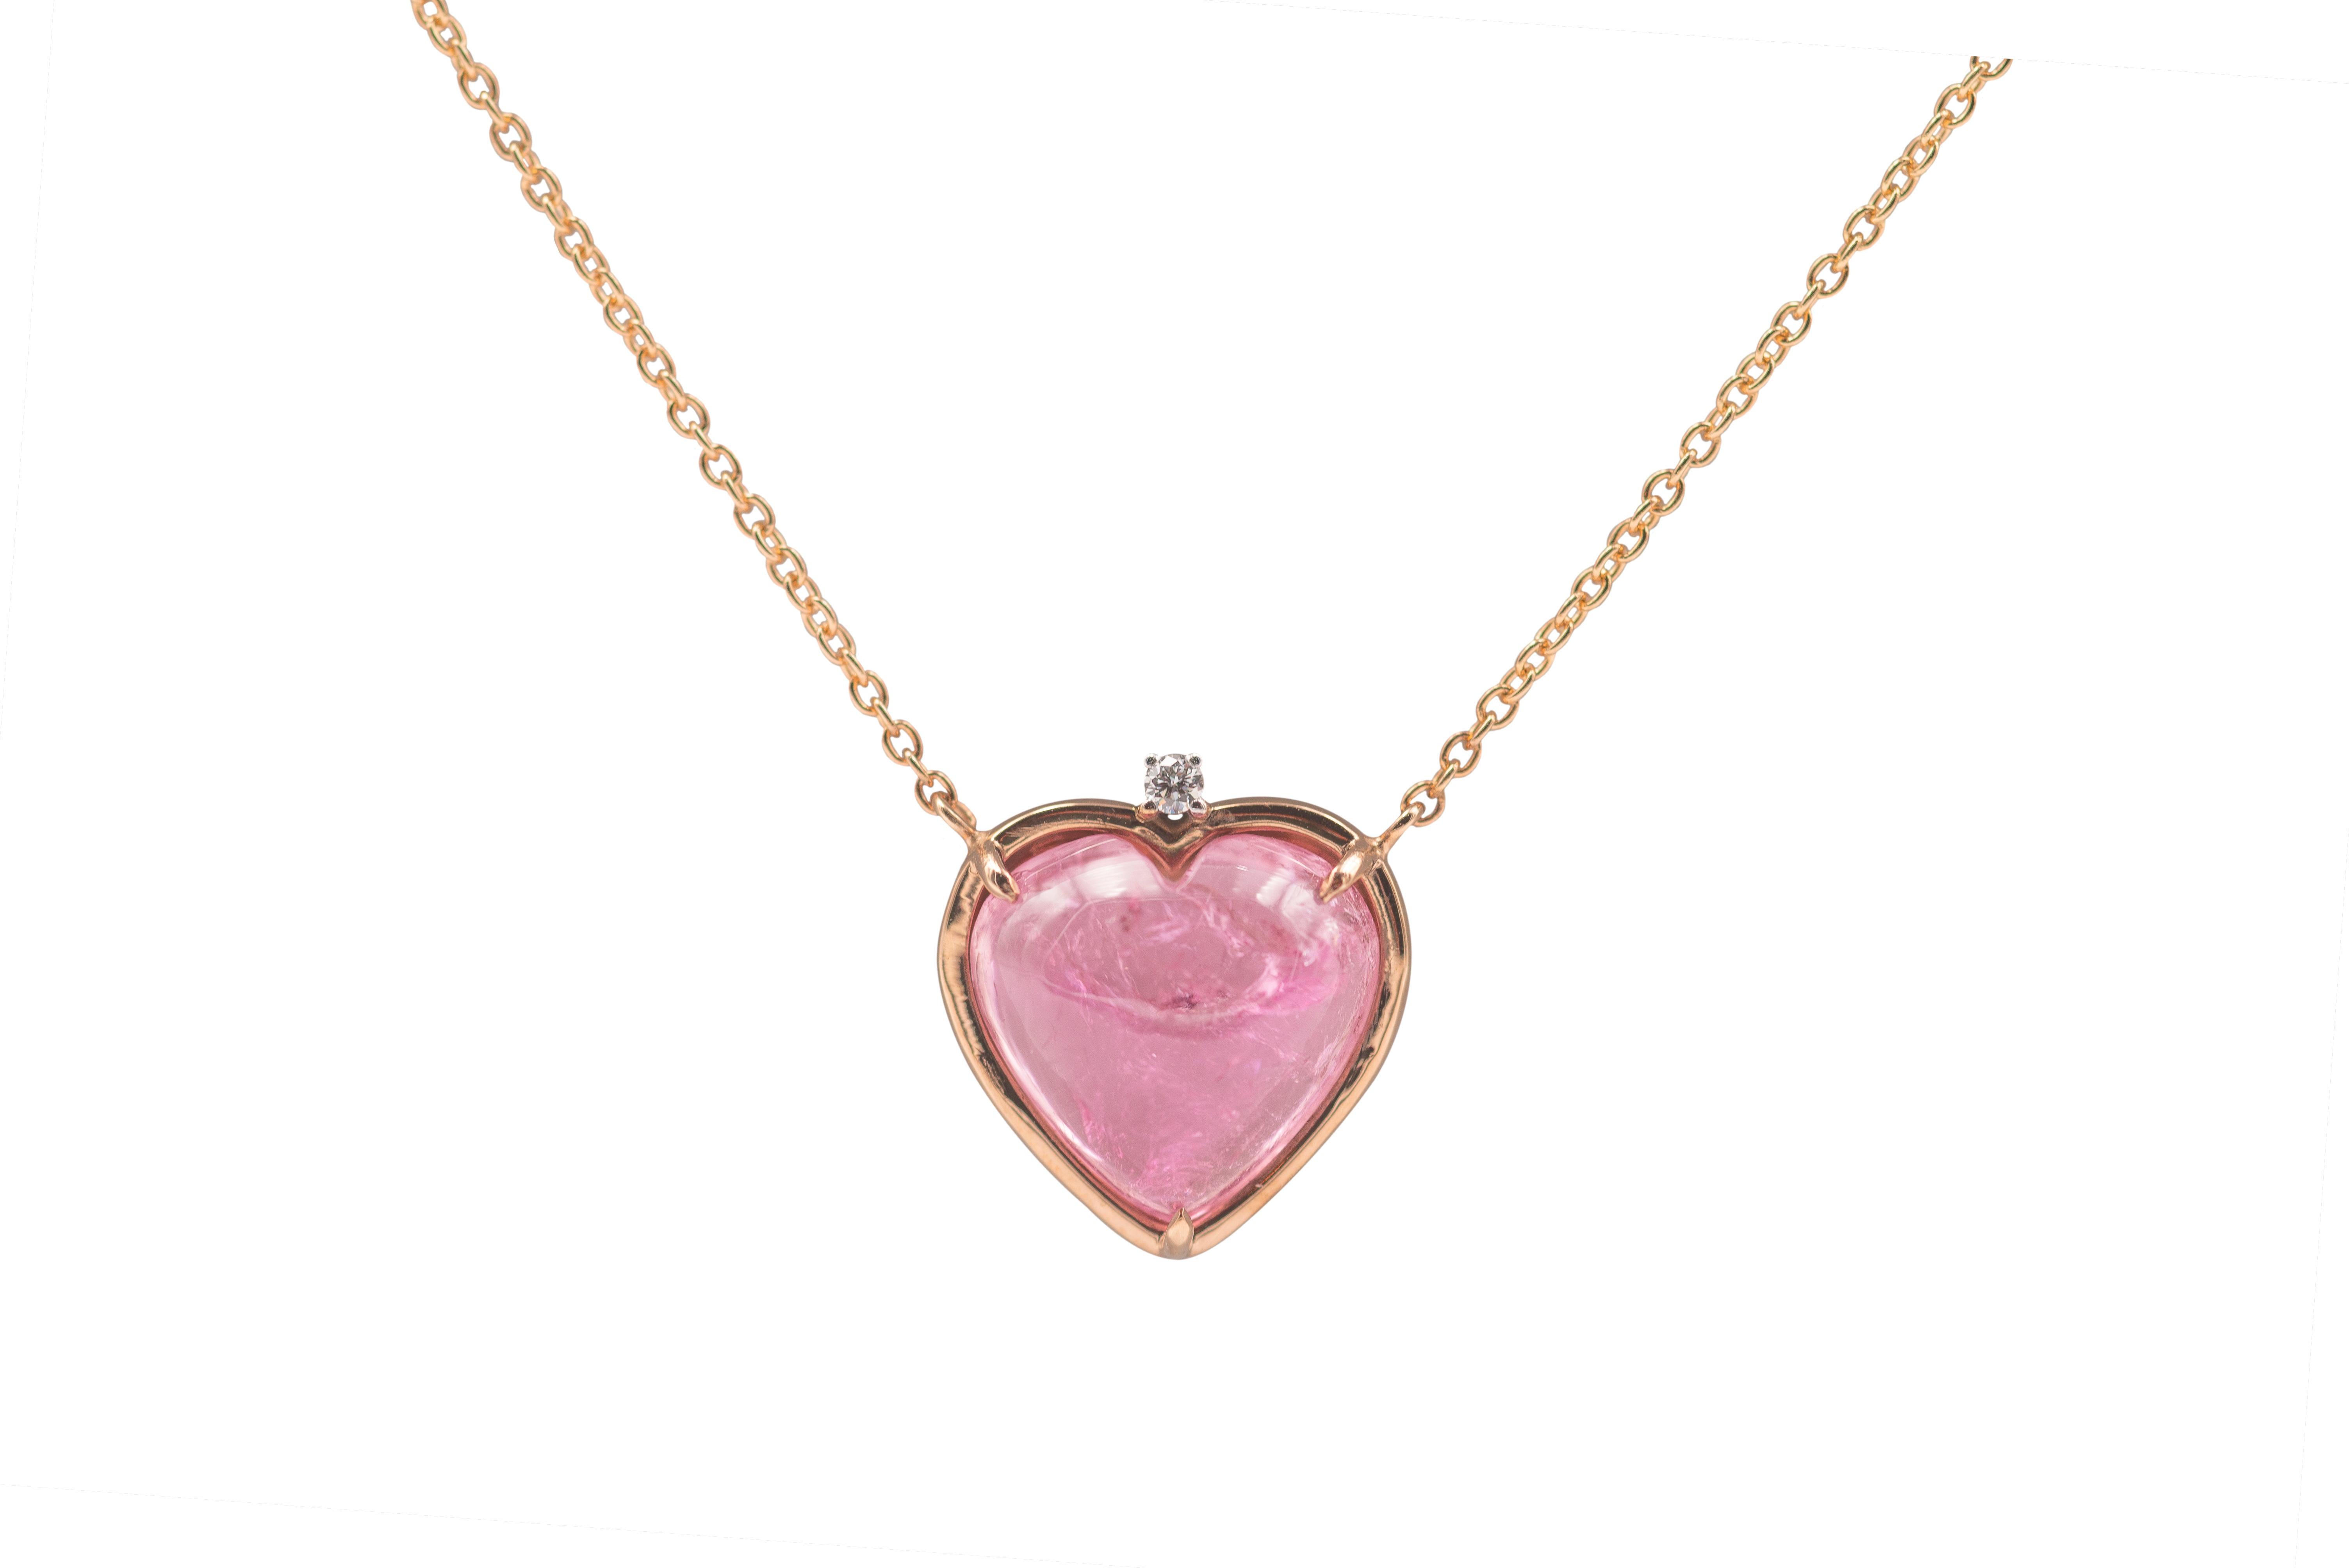 Rossella Ugolini Handcrafted 18 Karat Yellow Gold 5.2 Karat Pink Tourmaline 0.03 Diamond Heart Pendant Love Necklace 
The perfect gift for mother's day or a special day, this is a gift she will remember forever and never take off.  
A timeless pink